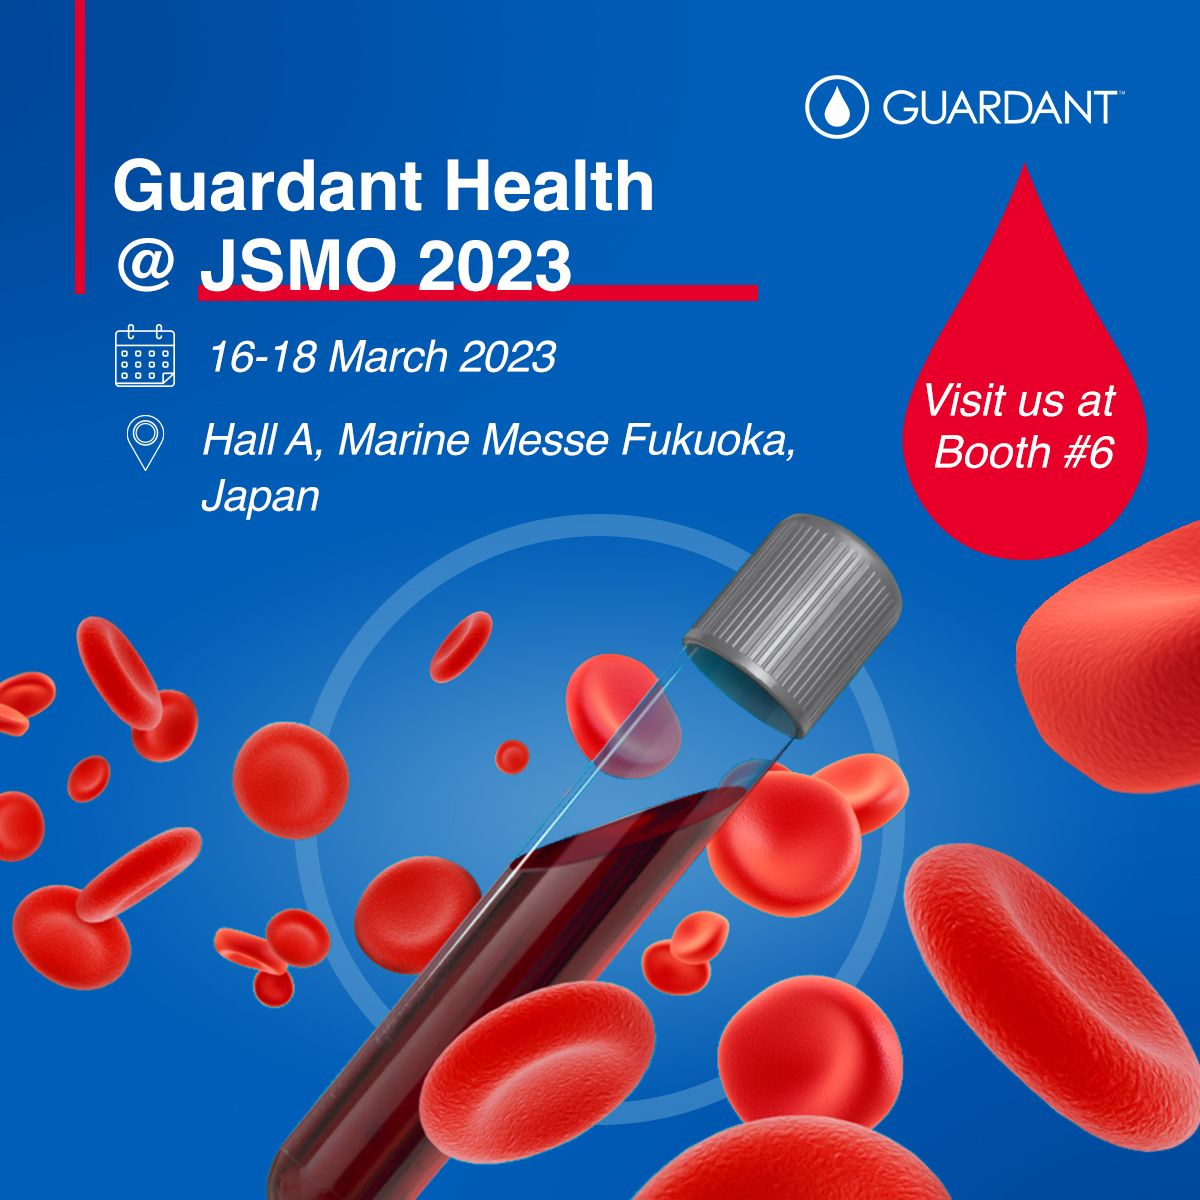 Guardant Health @ JSMO 2023: Visit us at Booth #6